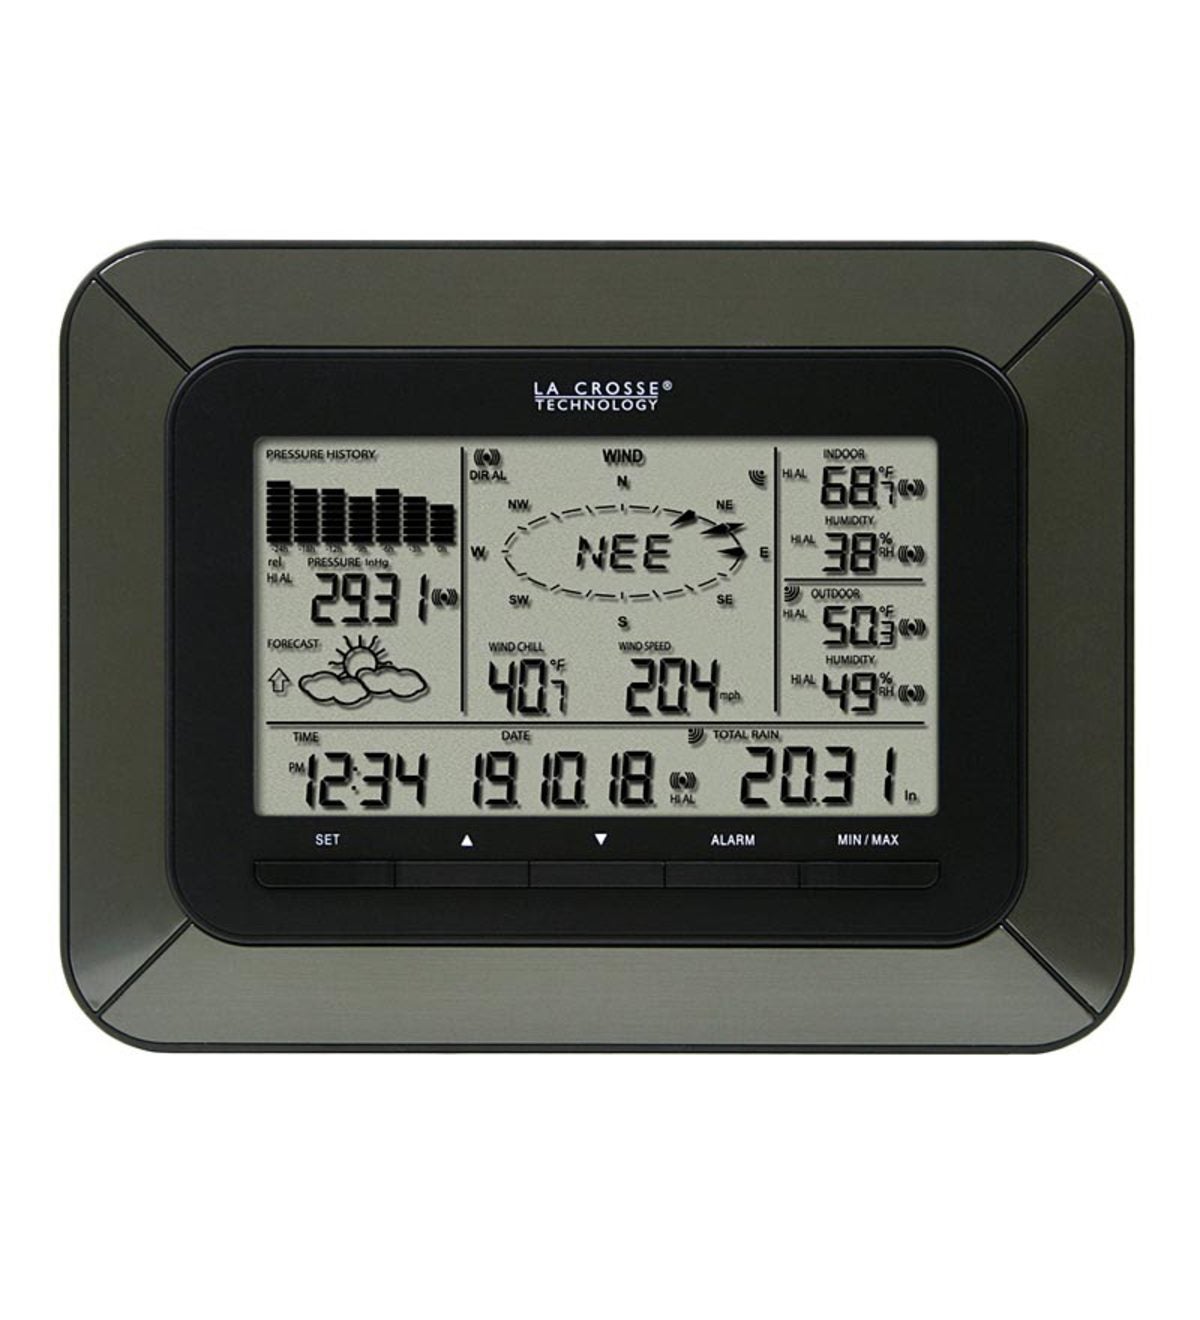 La Crosse Technology® Wireless Professional Weather Station With USB Transceiver